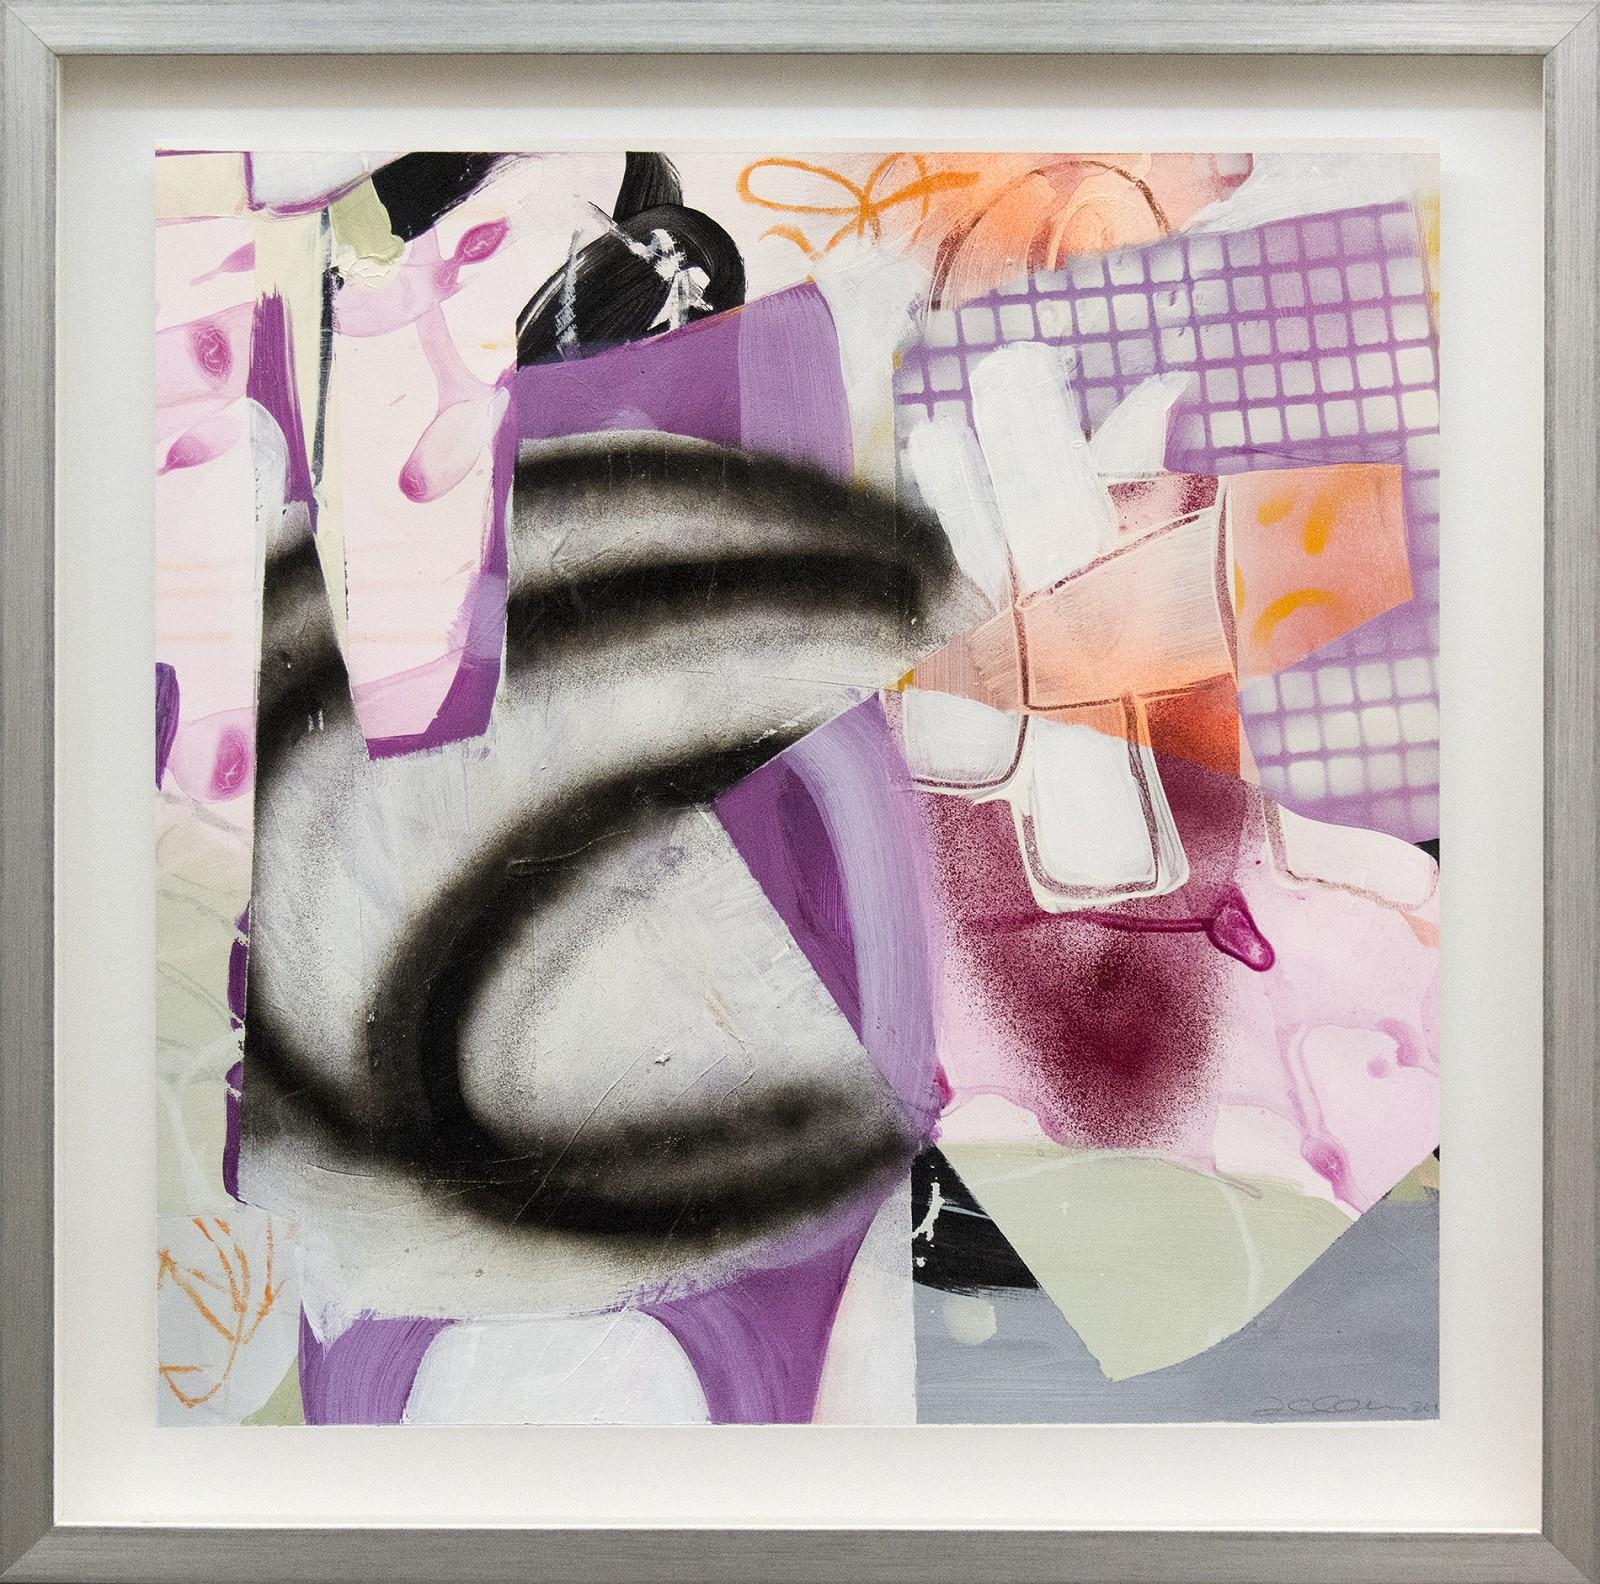 Fiona Ackerman Abstract Drawing - Composition No 18 - colorful collage in violet, peach, pink and tangerine